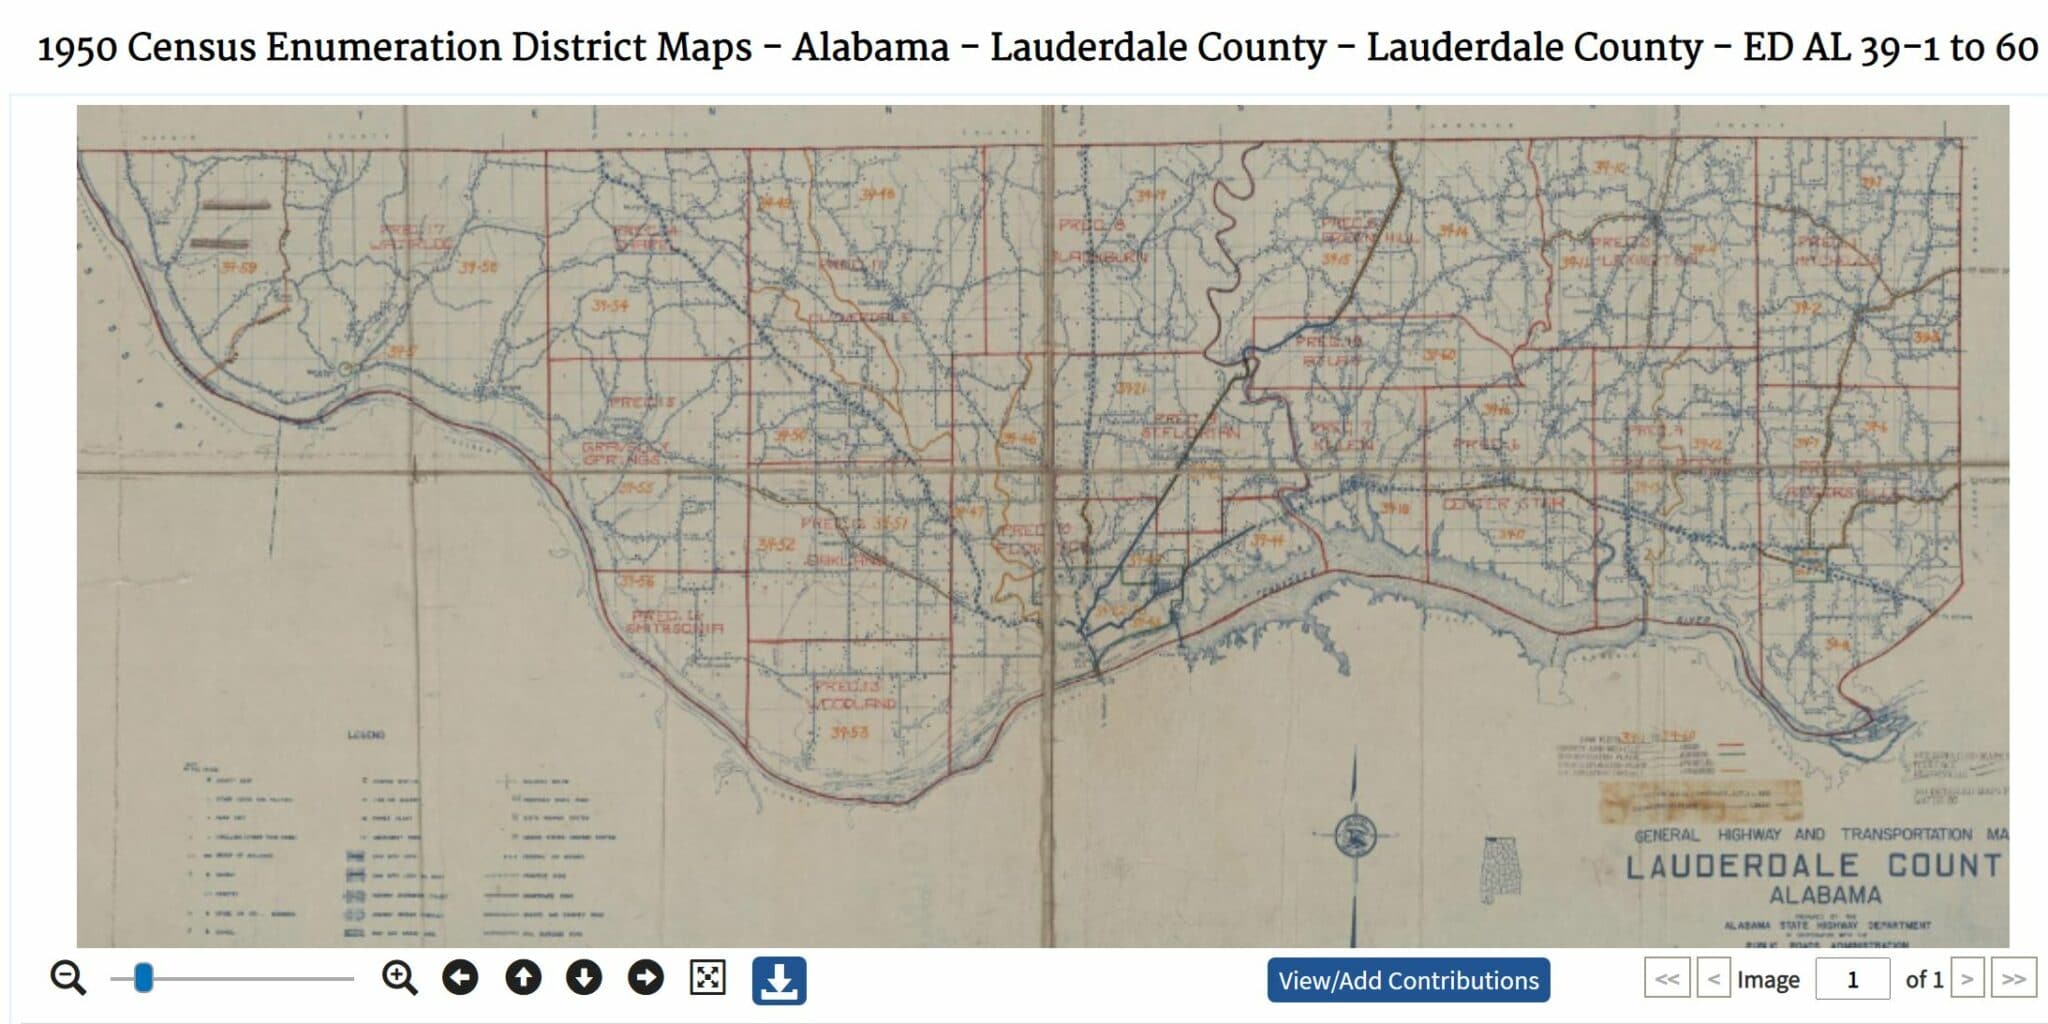 Enumeration District Map for Lauderdale County Alabama from National Archives Website